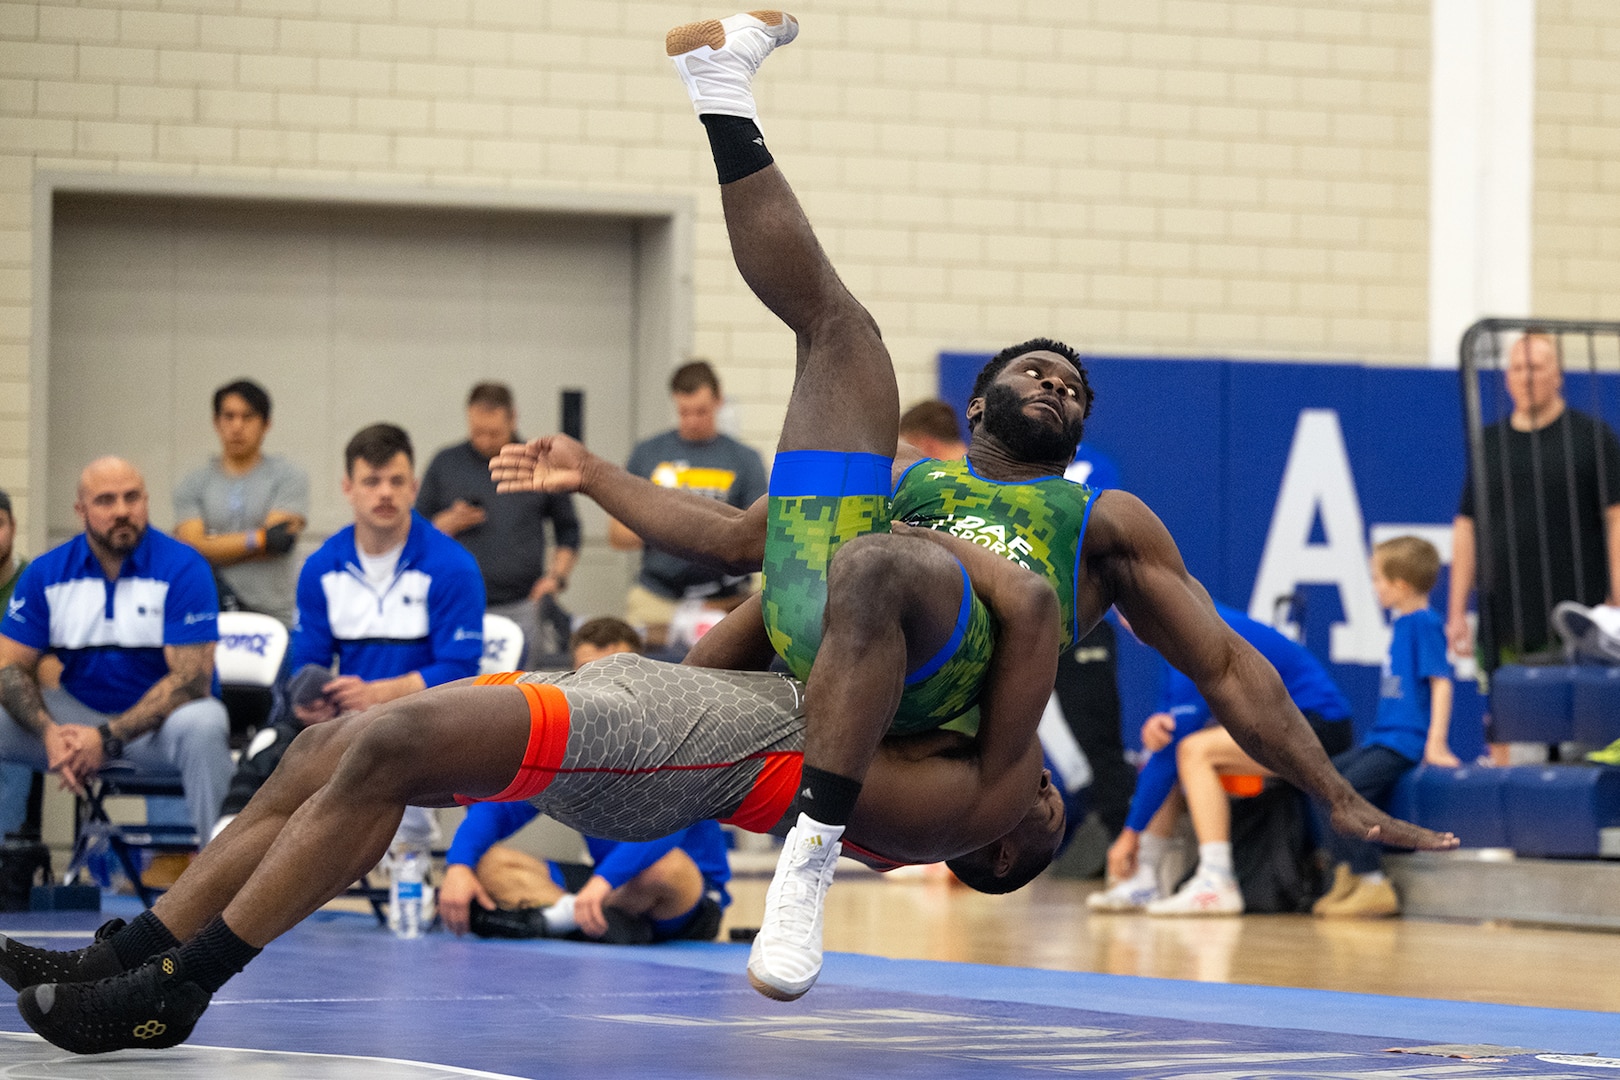 Army Spc. Timothy Young throws Air Force Staff Sgt. Diante Cooper out of bounds during the Greco-Roman style wrestling portion of  the 2024 Armed Forces Wrestling Championship at the U.S. Air Force Academy in Colorado Springs, Colo. March 2, 2024. (DoD photo by EJ Hersom)